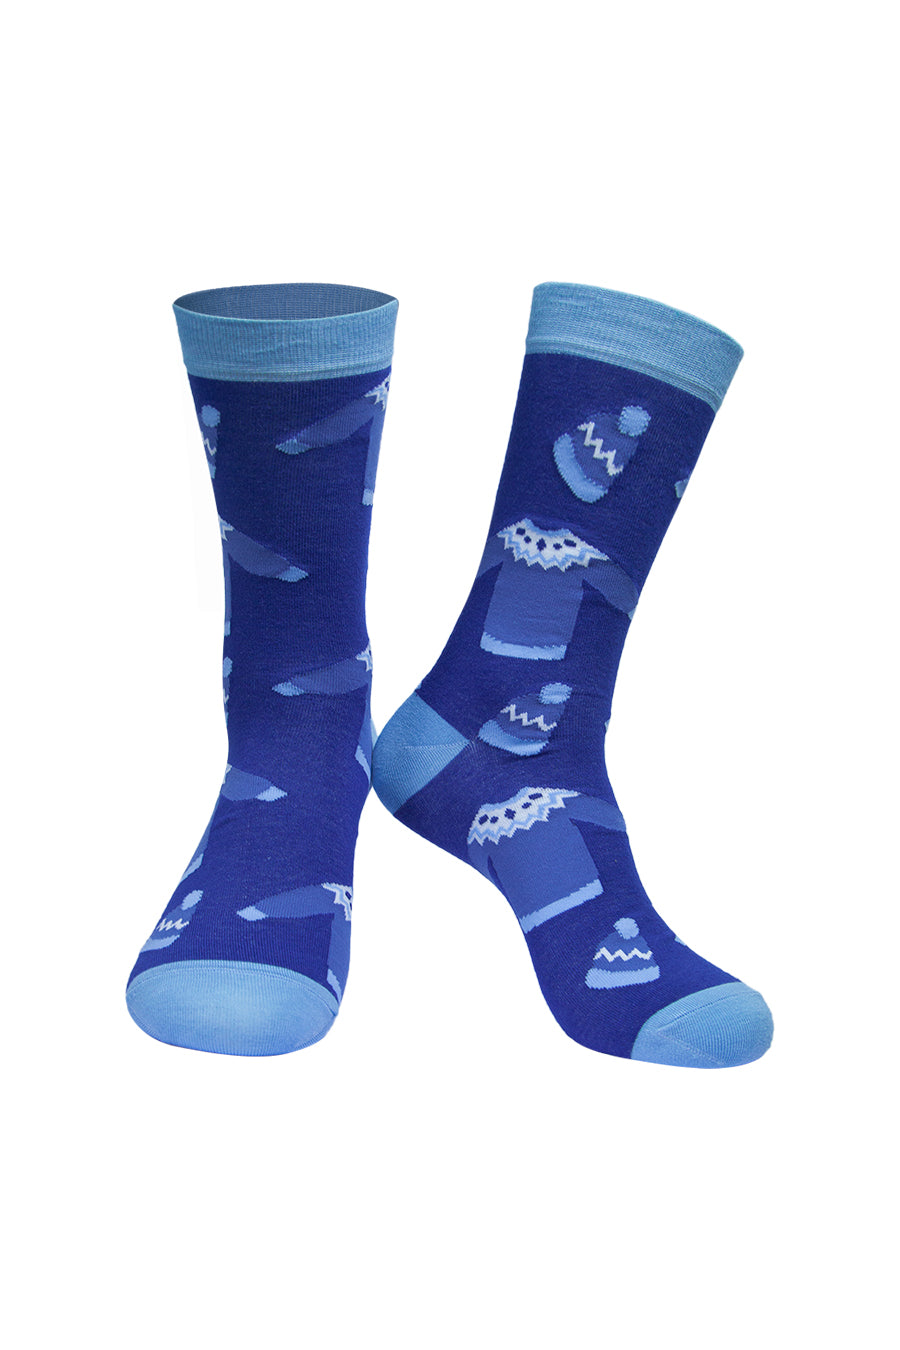 royal blue socks with light blue heel, toe and cuff with a pattern of christmas jumpers and knitted hats